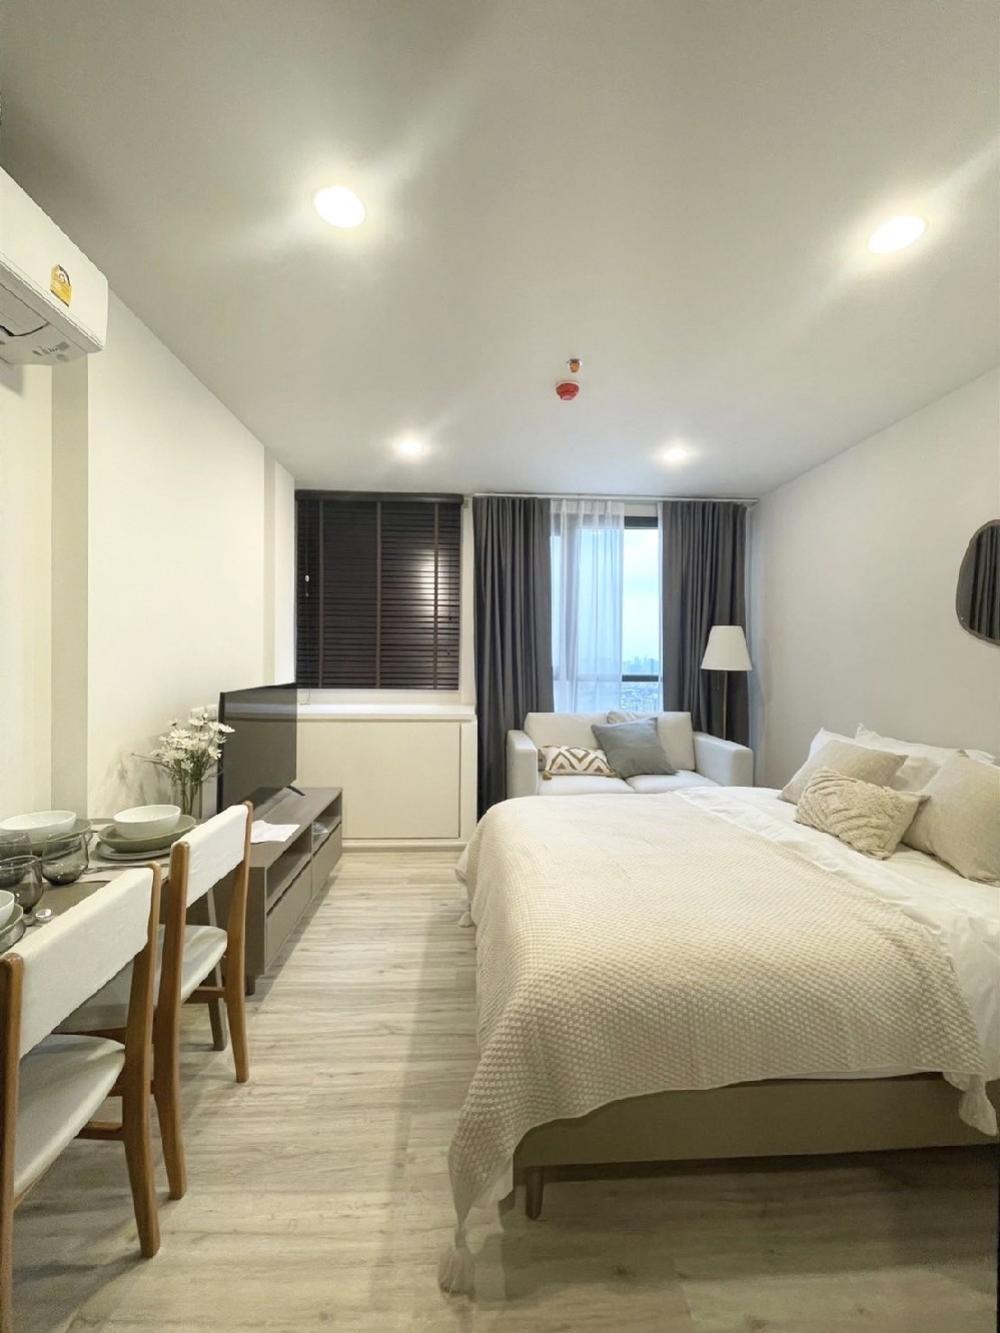 For RentCondoRatchadapisek, Huaikwang, Suttisan : Condo for rent XT Huaikwang, complete furniture and electrical appliances. There are many rooms, very beautiful rooms.